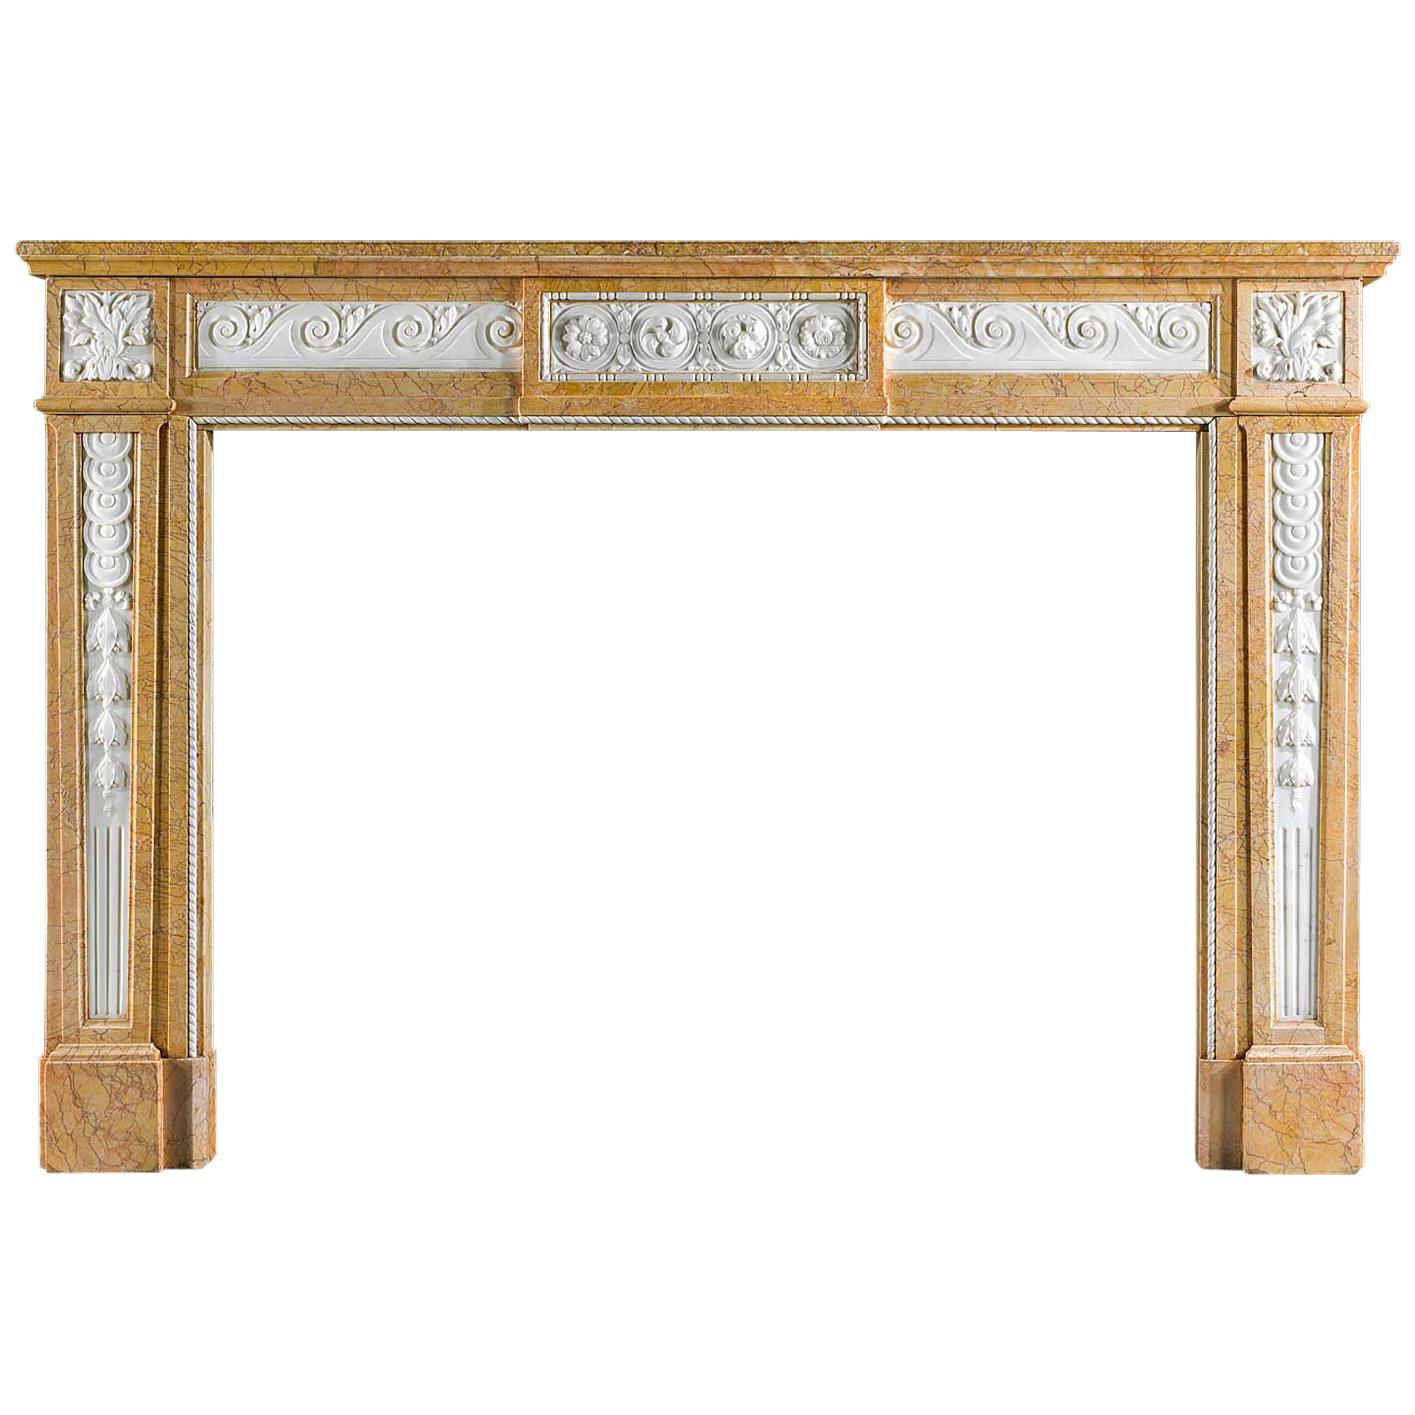 Antique Chimneypiece Carved in Statuary and Crema Valencua Marble